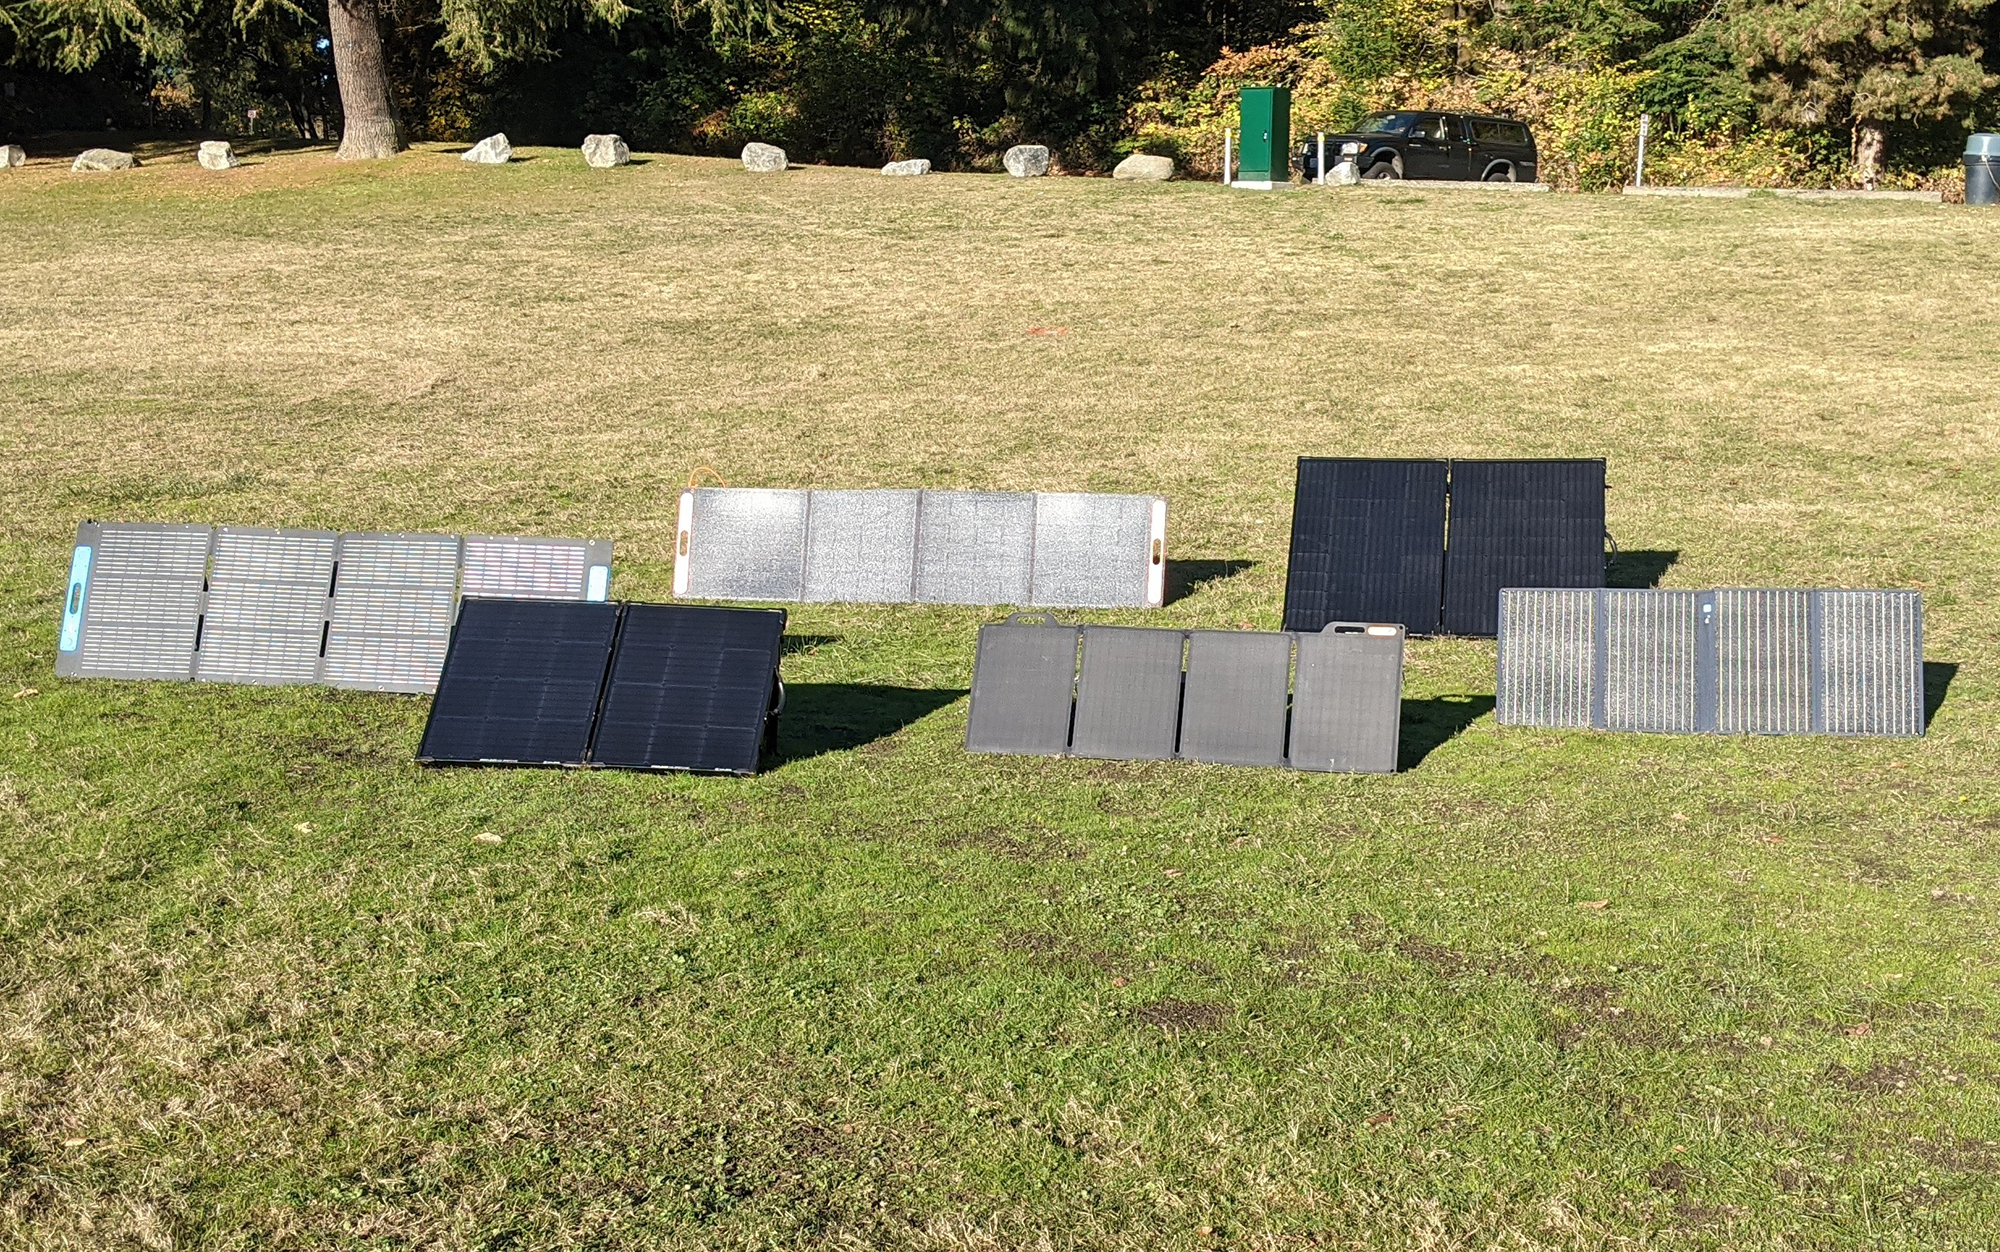 Solar panels sitting in the grass.